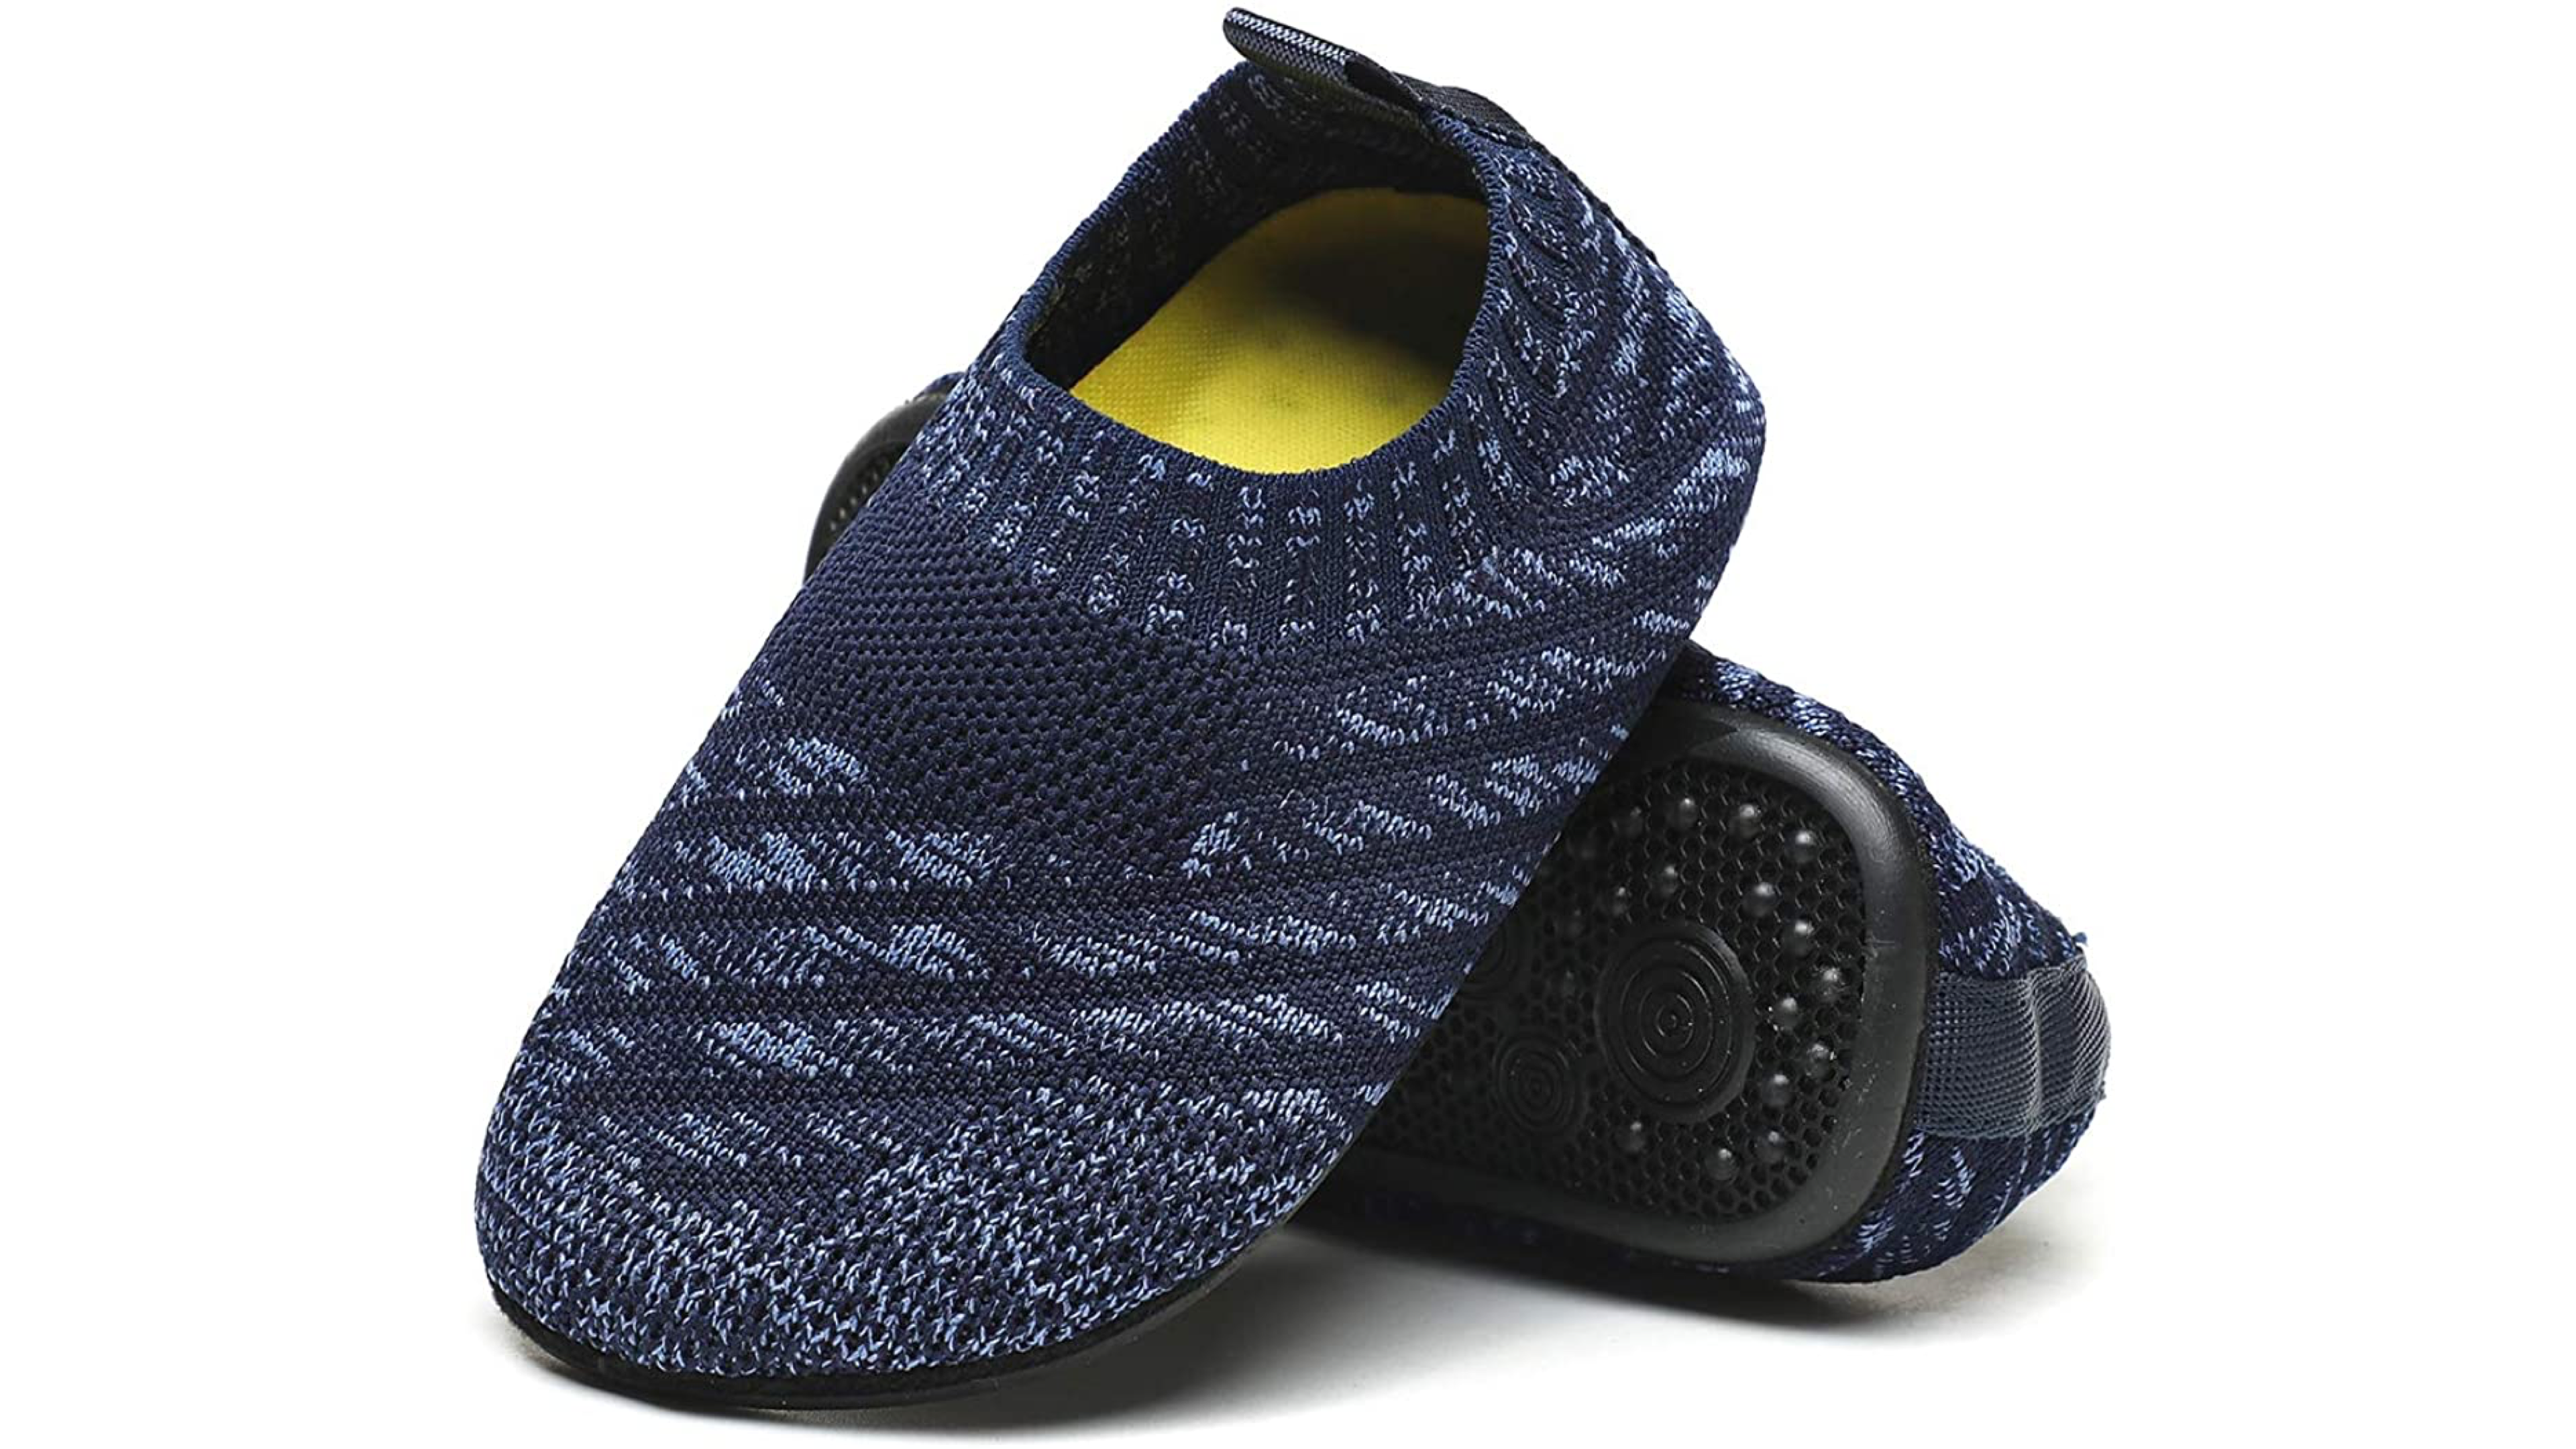 toddler slip-ons with grippy bottoms for balance